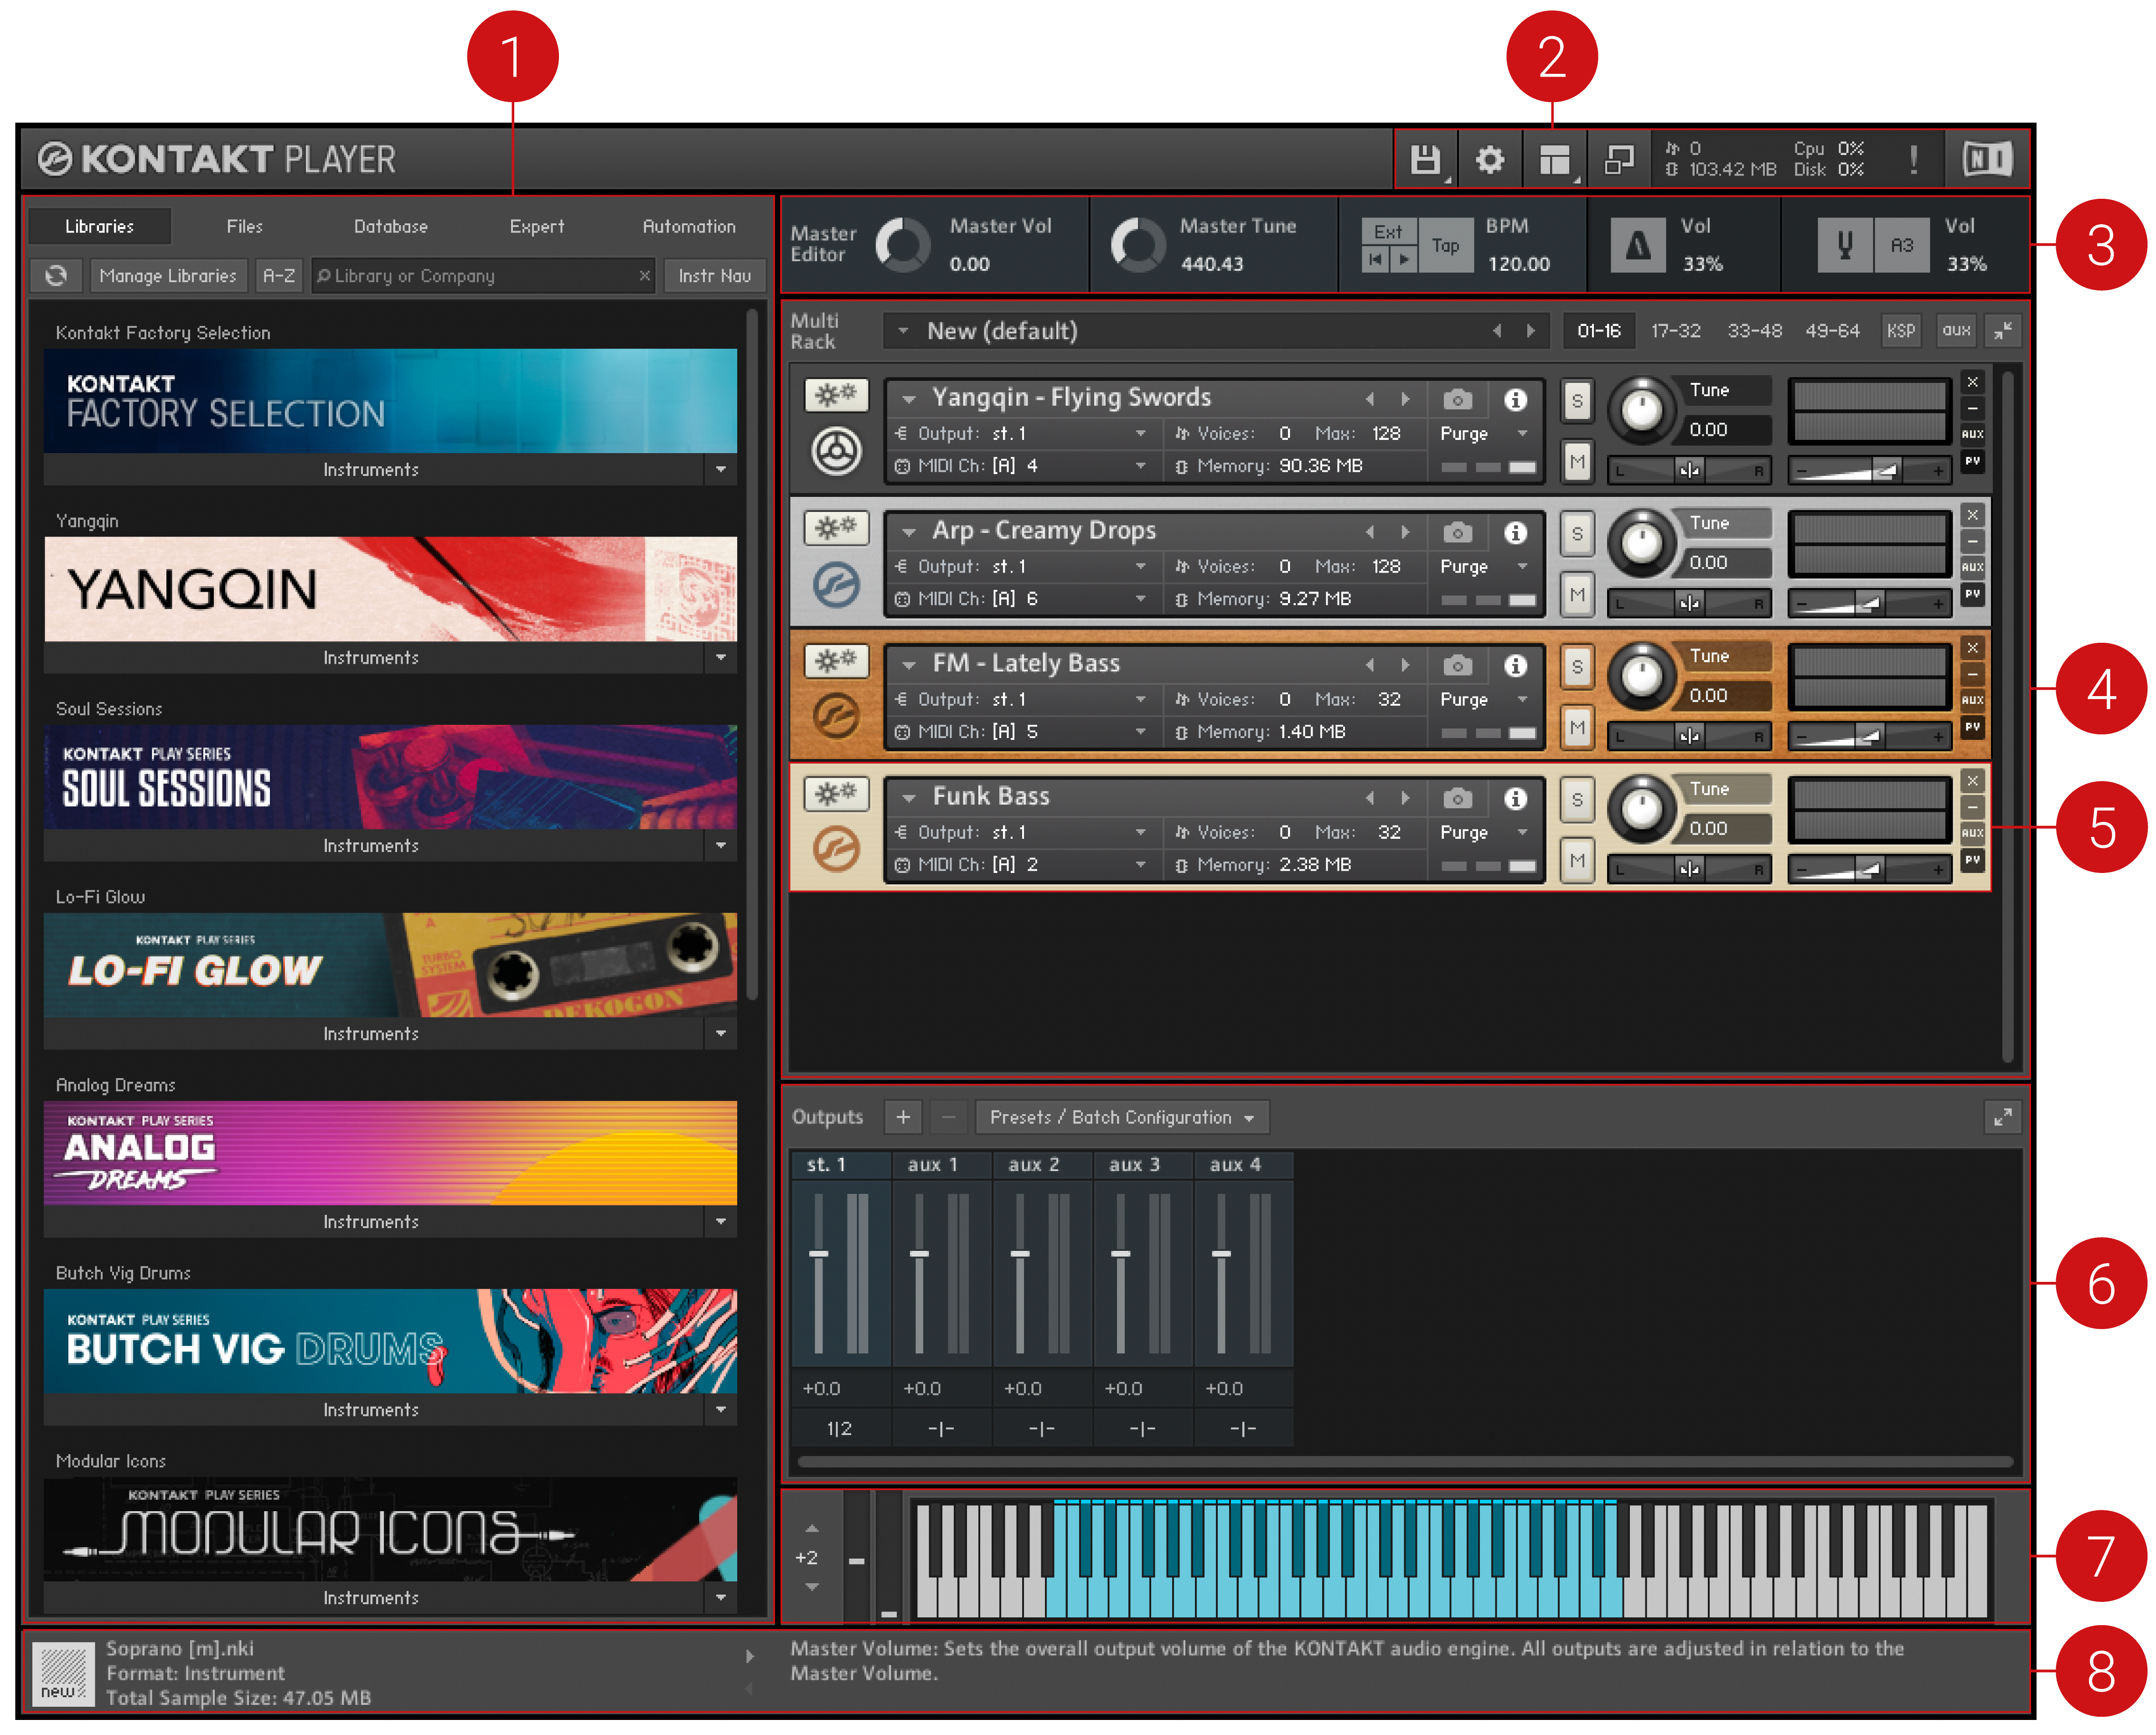 The Kontakt Player interface, with various areas highlighted. These areas are described below.